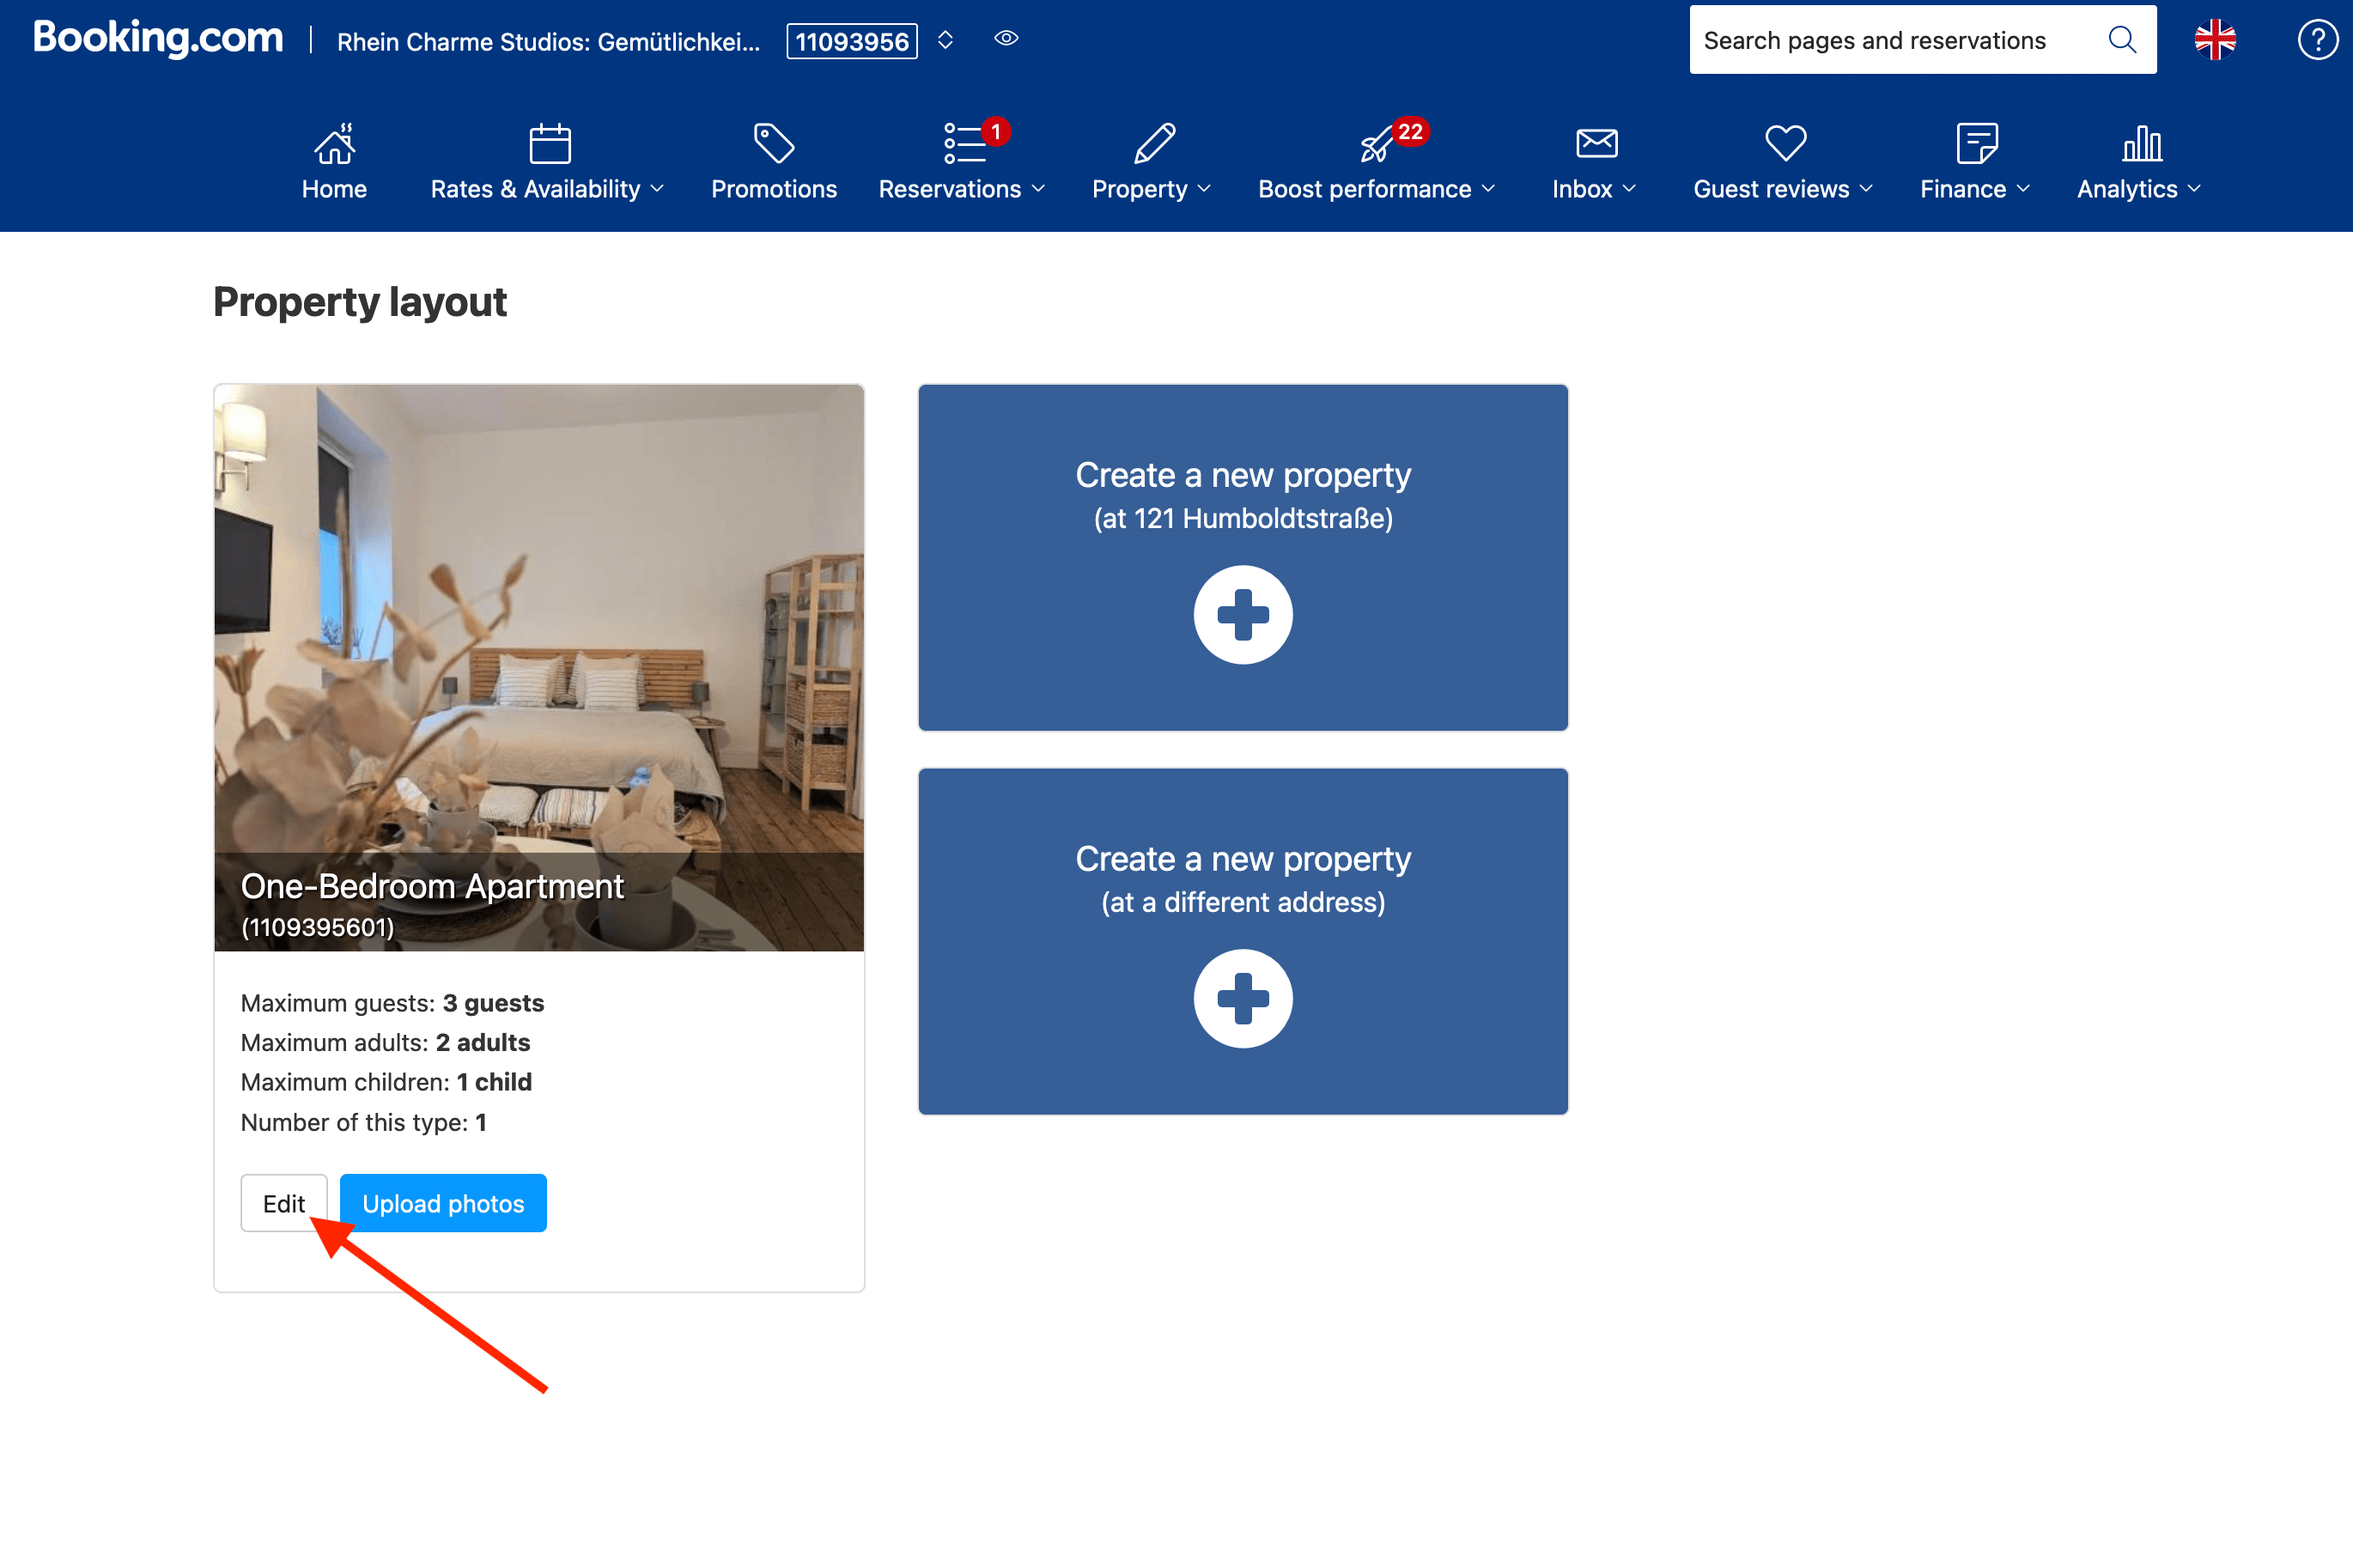 Step-by-step navigation through Booking.com admin interface to Property Layout